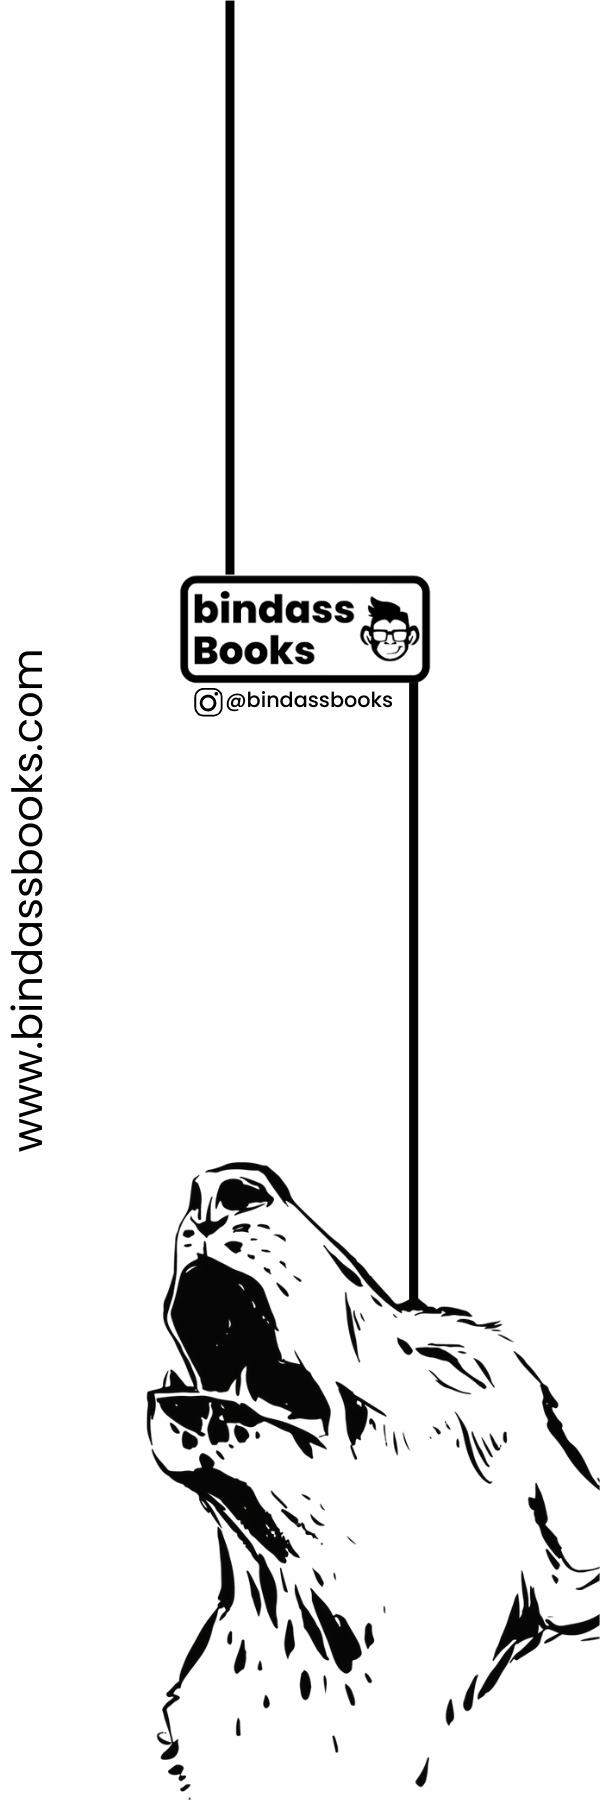 Bindass Books Exclusive Bookmarks Pack of 9